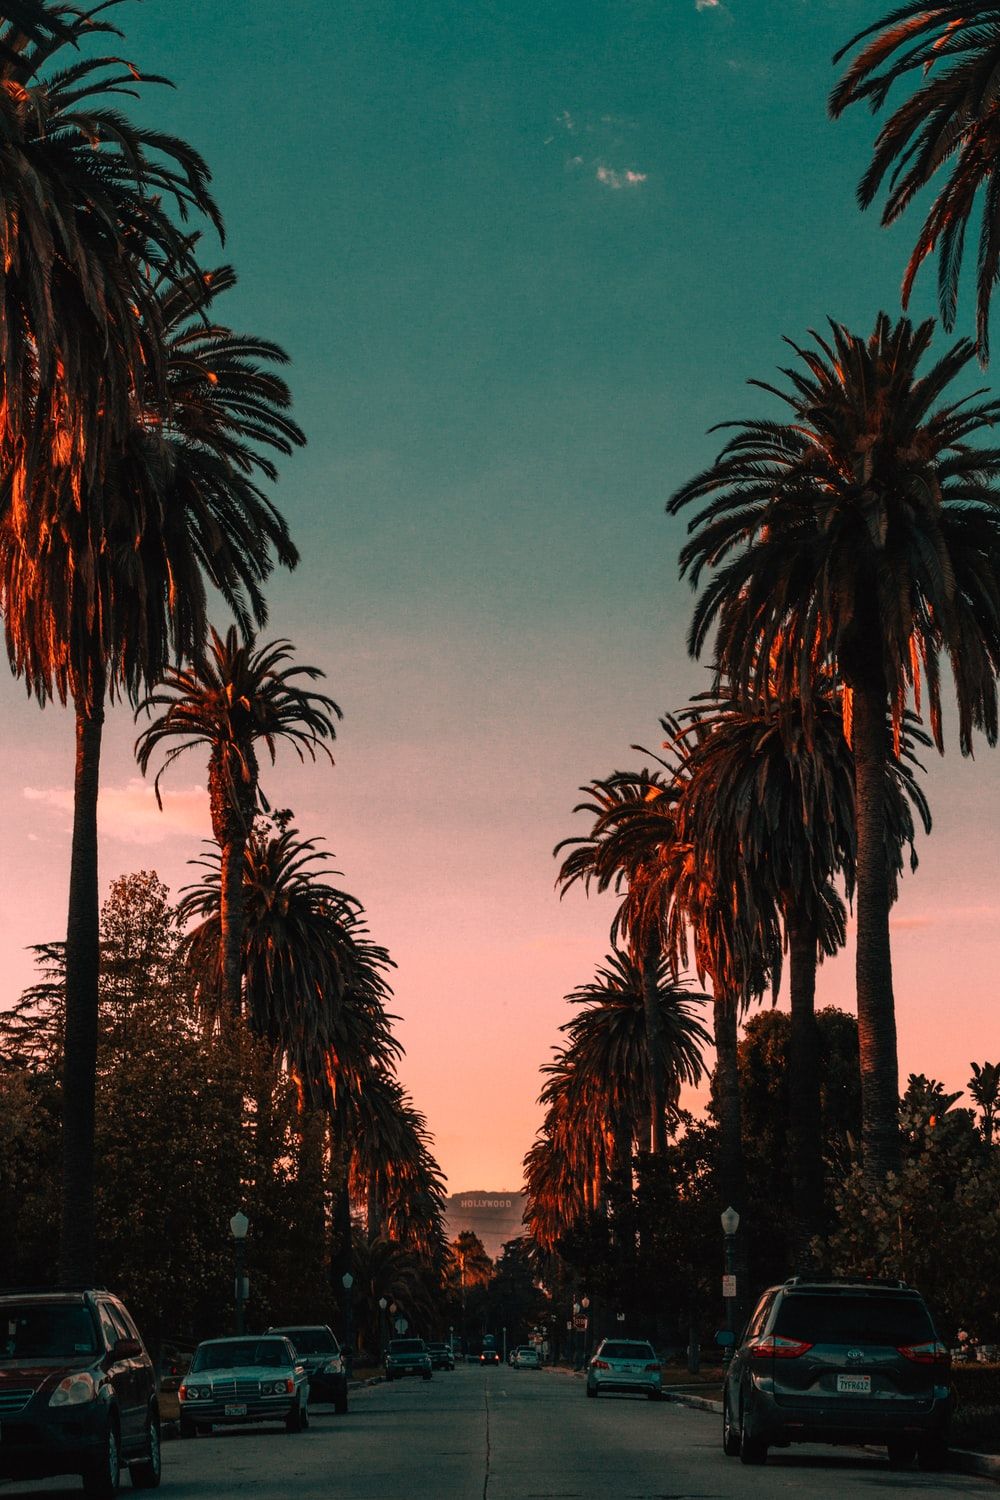 Los Angeles Iphone Wallpapers 4k Hd Los Angeles Iphone Backgrounds On Wallpaperbat